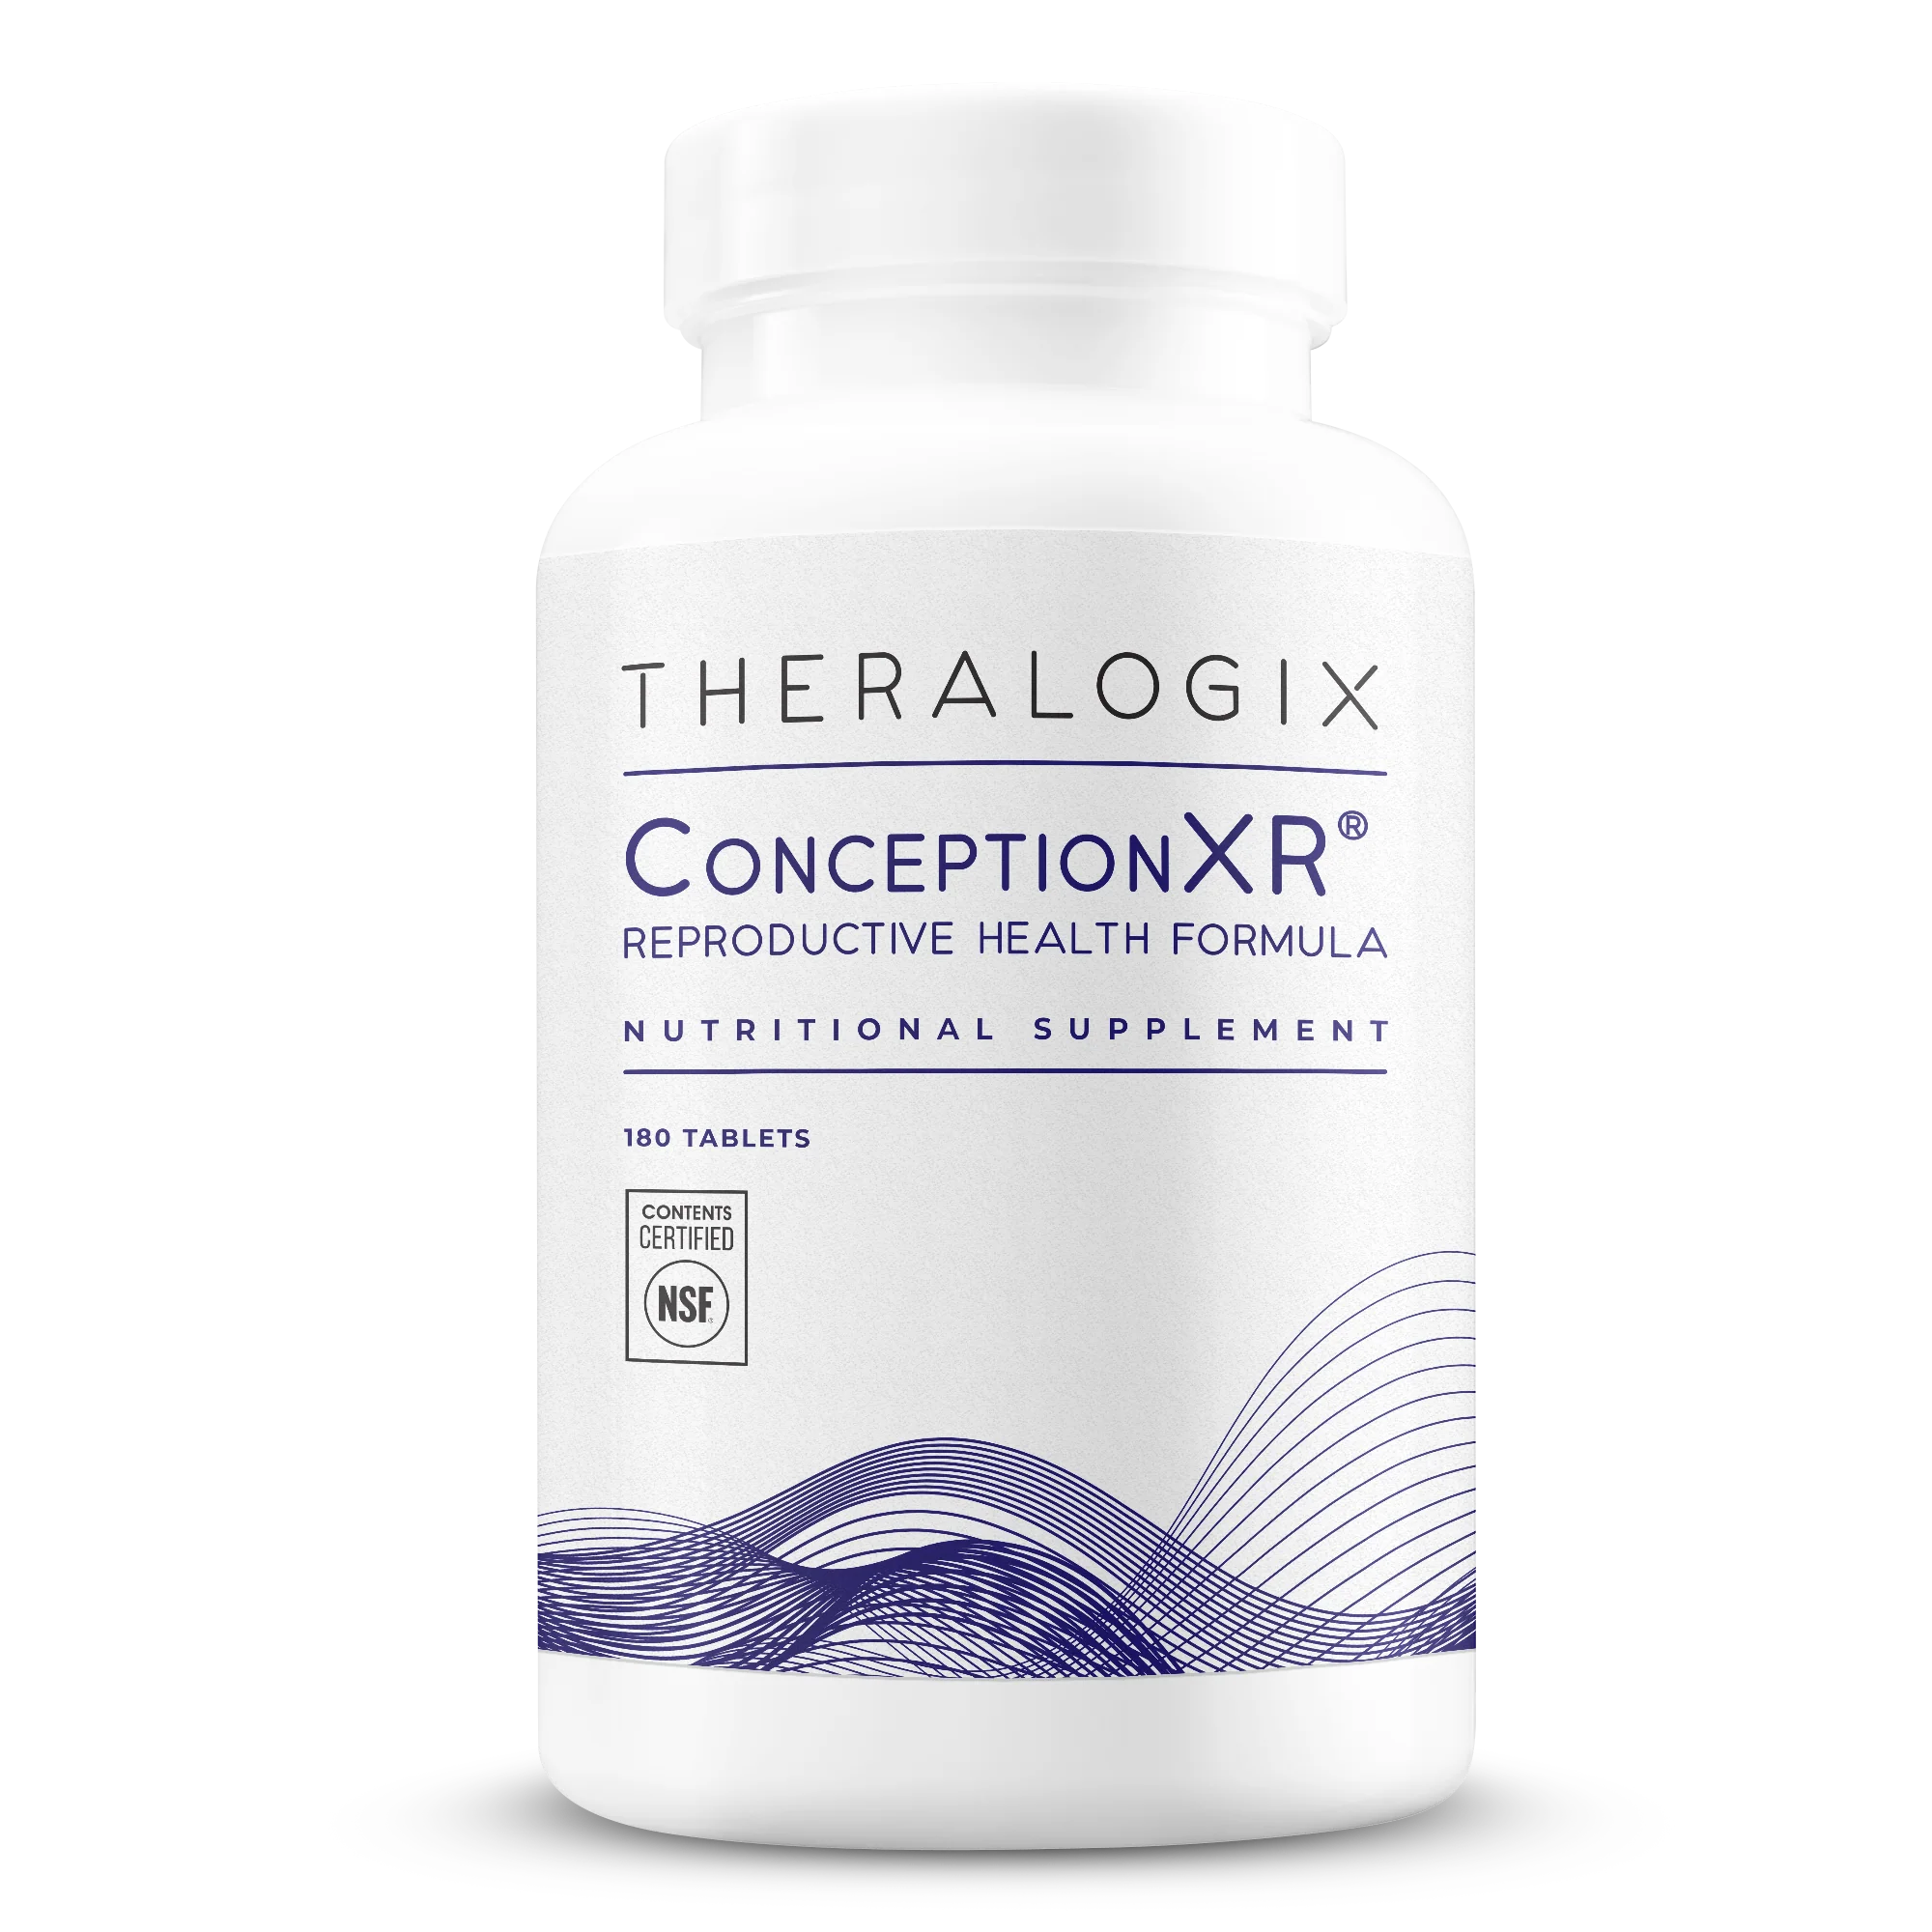 ConceptionXR® Reproductive Health Formula (Ships from the US, arrives in 11-14 days)